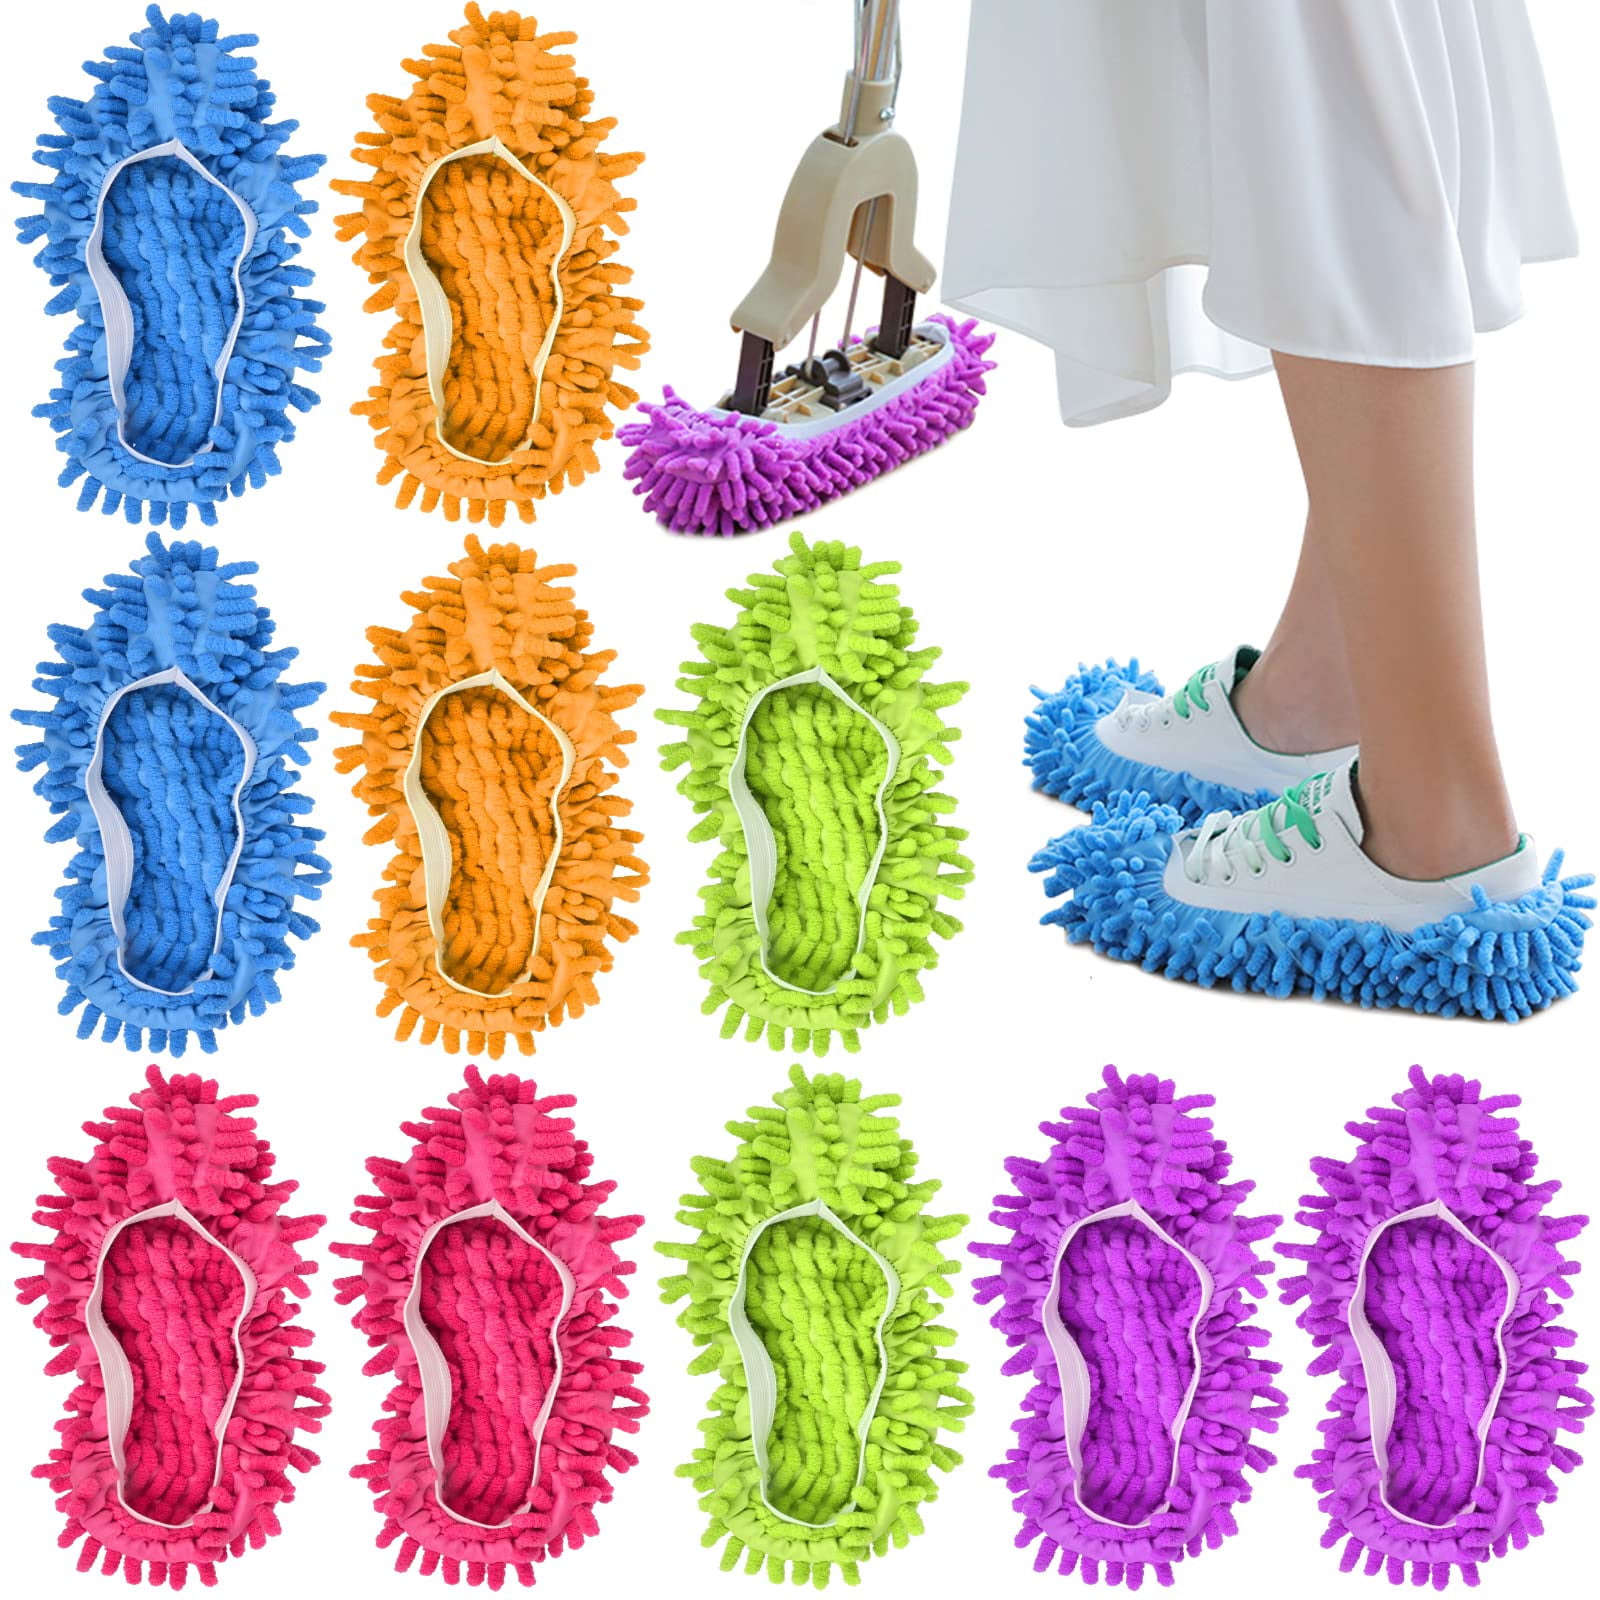 Mop Slippers In 5 Colors 